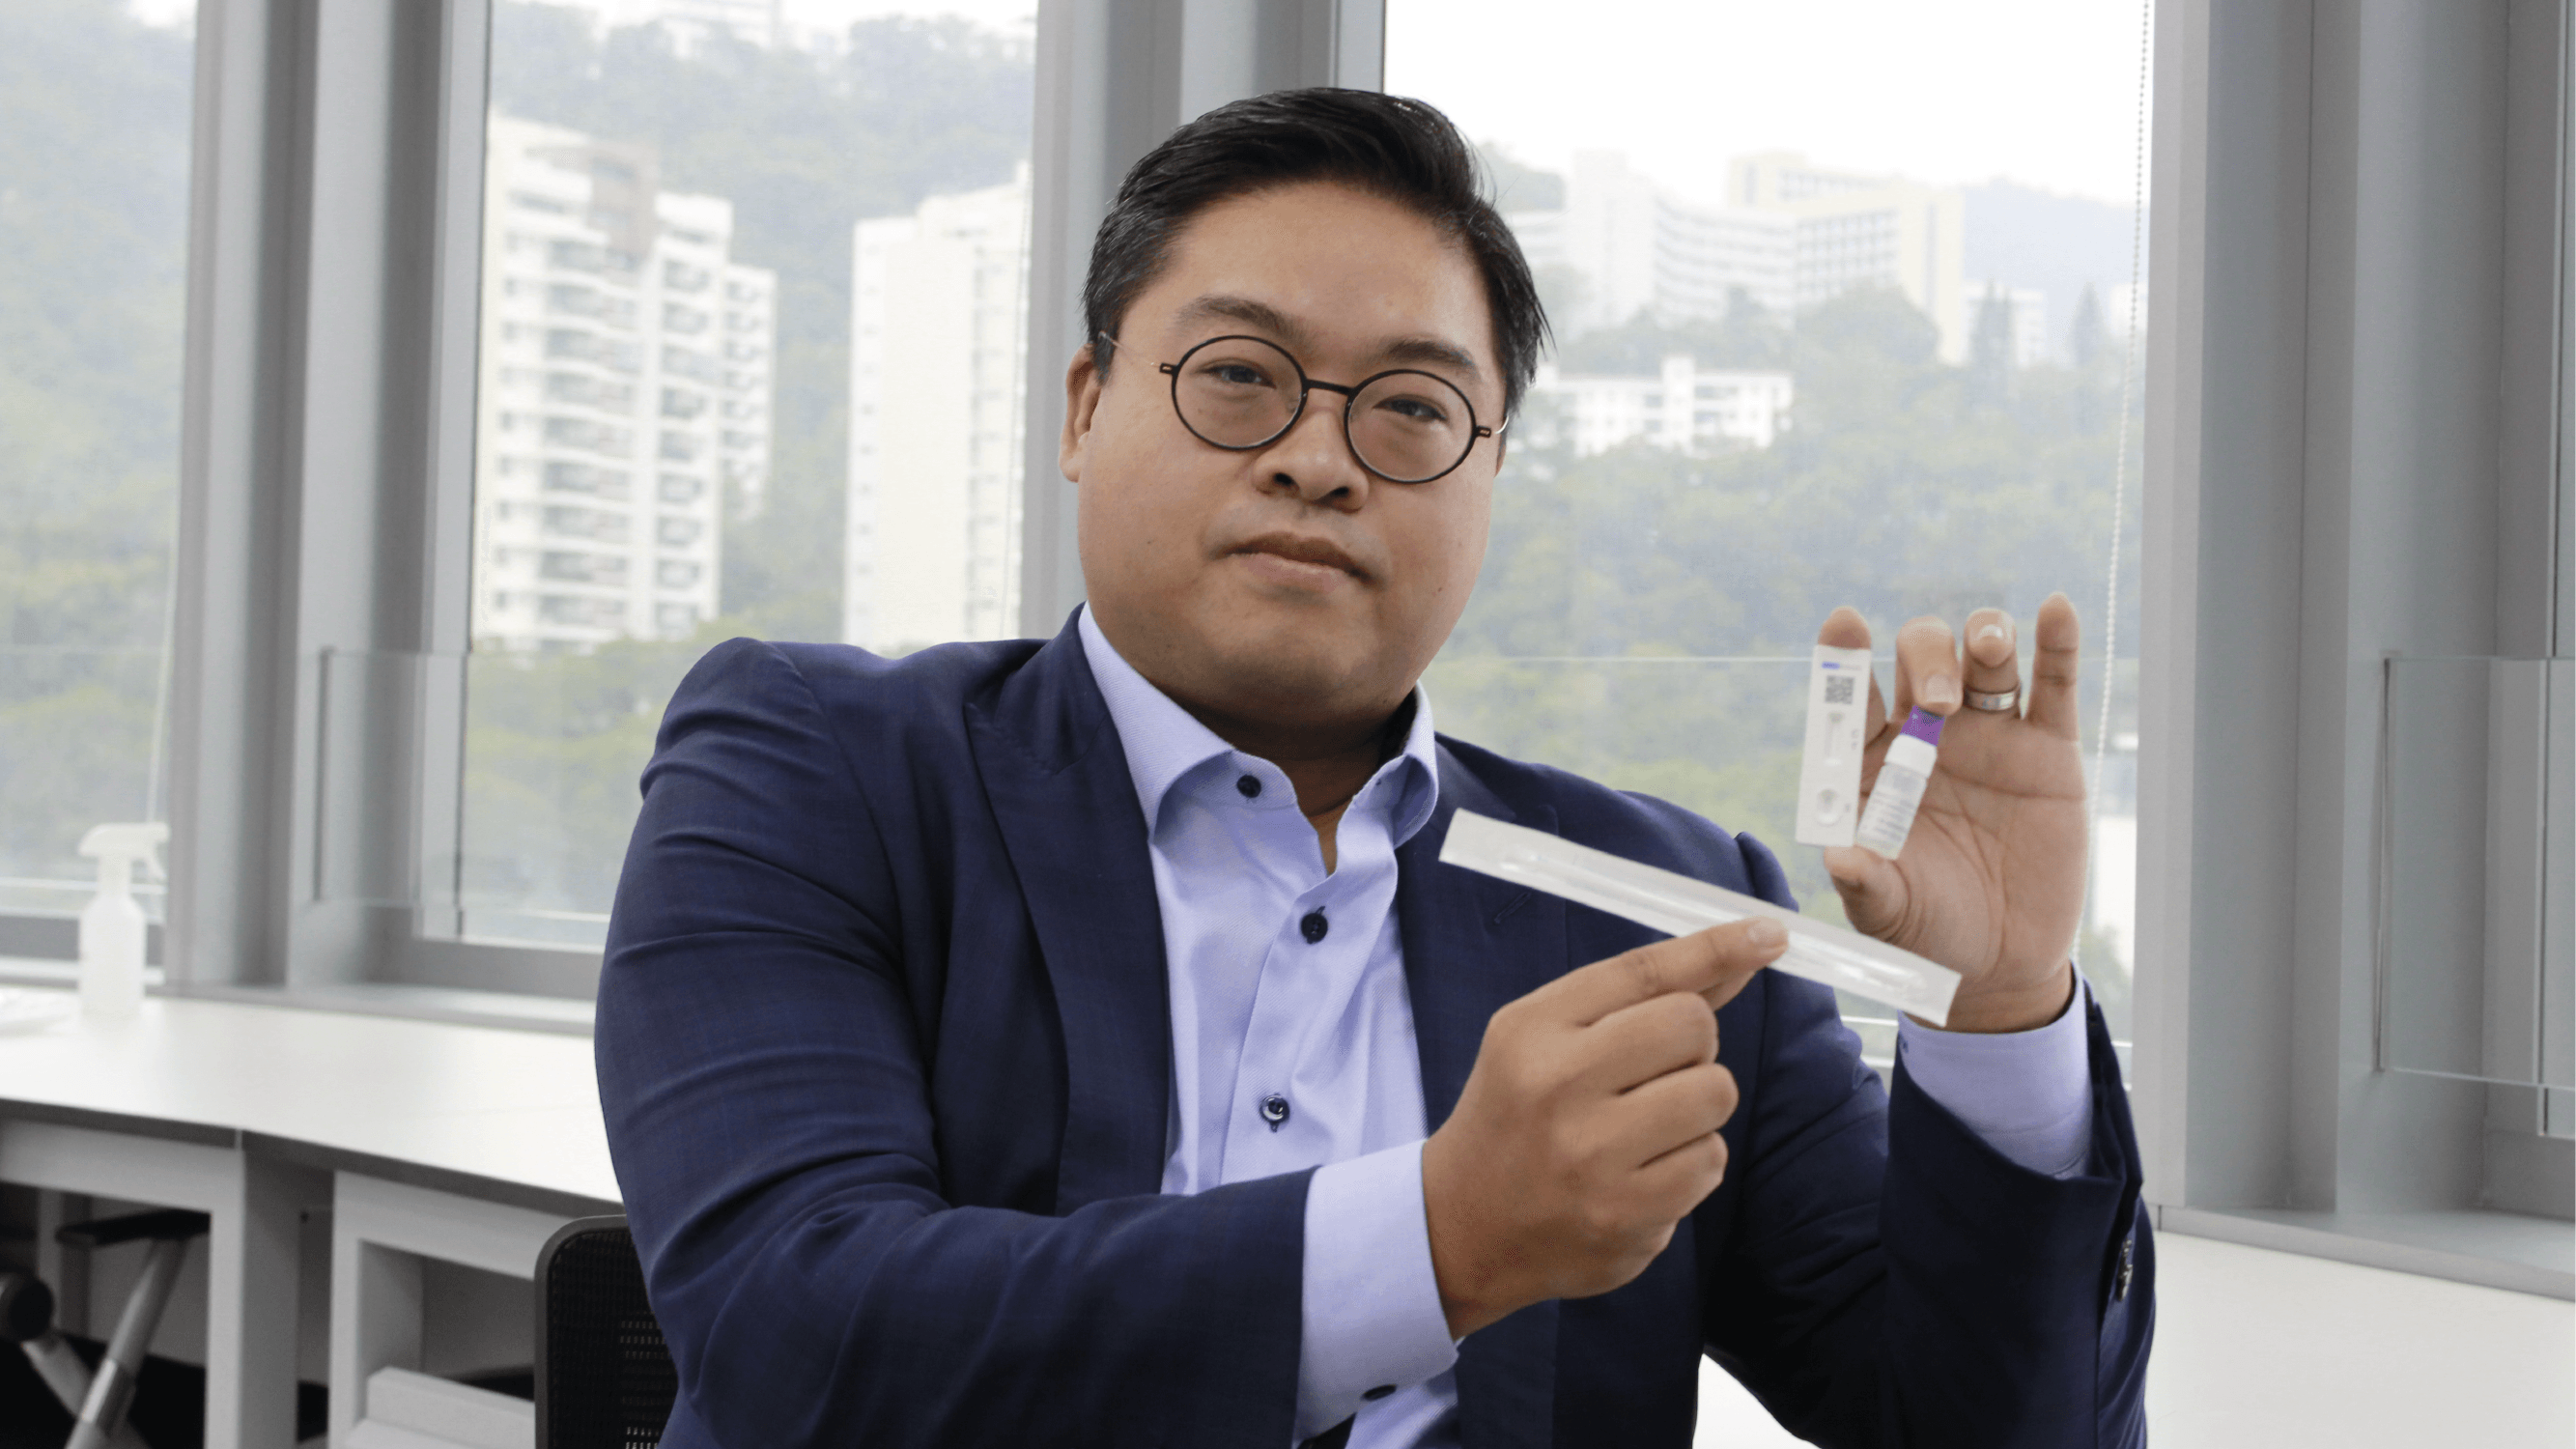 PHASE Scientific: Government Purchases 1 million Rapid Antigen Test Kits, will Increase Production Capacity to Provide to Hong Kong